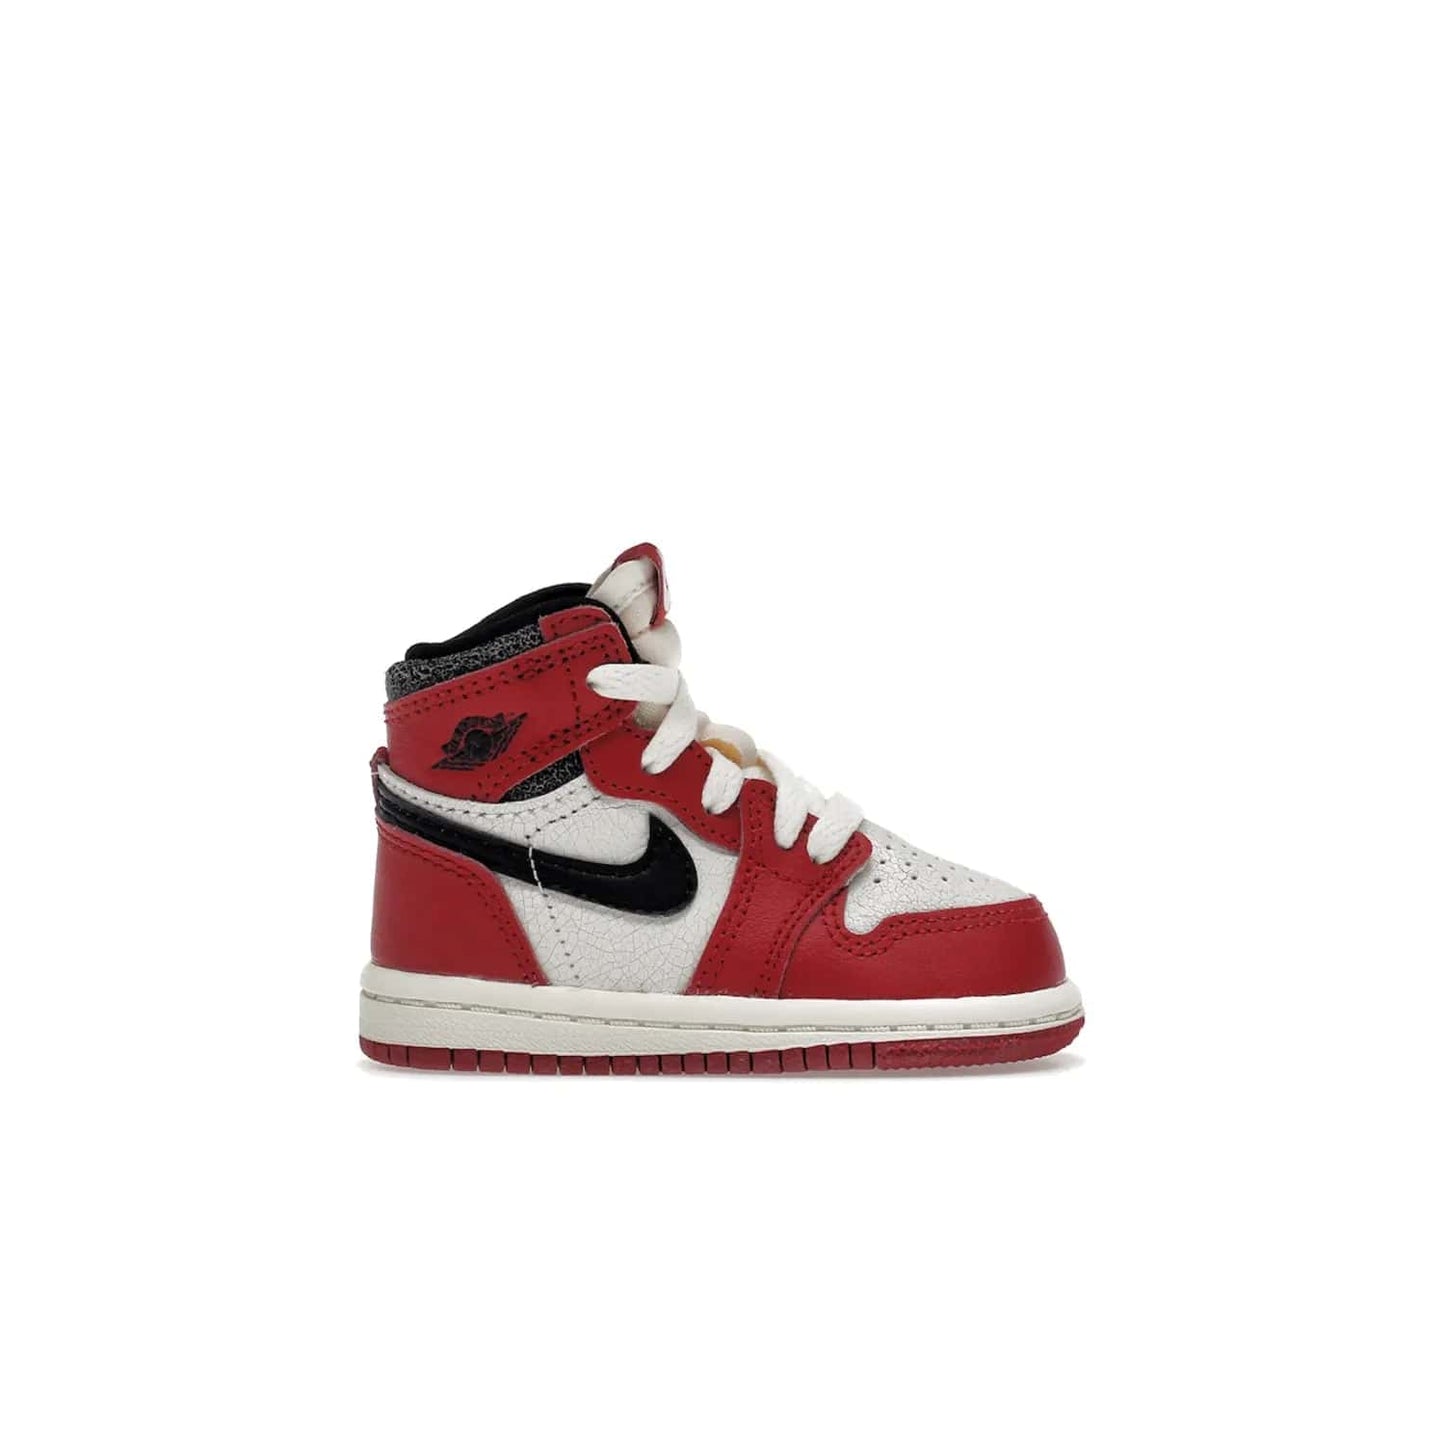 Jordan 1 Retro High OG Chicago Lost and Found (TD) - Image 1 - Only at www.BallersClubKickz.com - Introducing the Air Jordan 1 Retro High OG Lost and Found TD – a vibrant combination of 4 colors: muslin, varsity, sail and black. Featuring a crackled leather upper and AIR units for comfort and a signature Wings logo, these retro shoes add comfort and style for your little ones at $70. Get your pair before 19th December 2022!